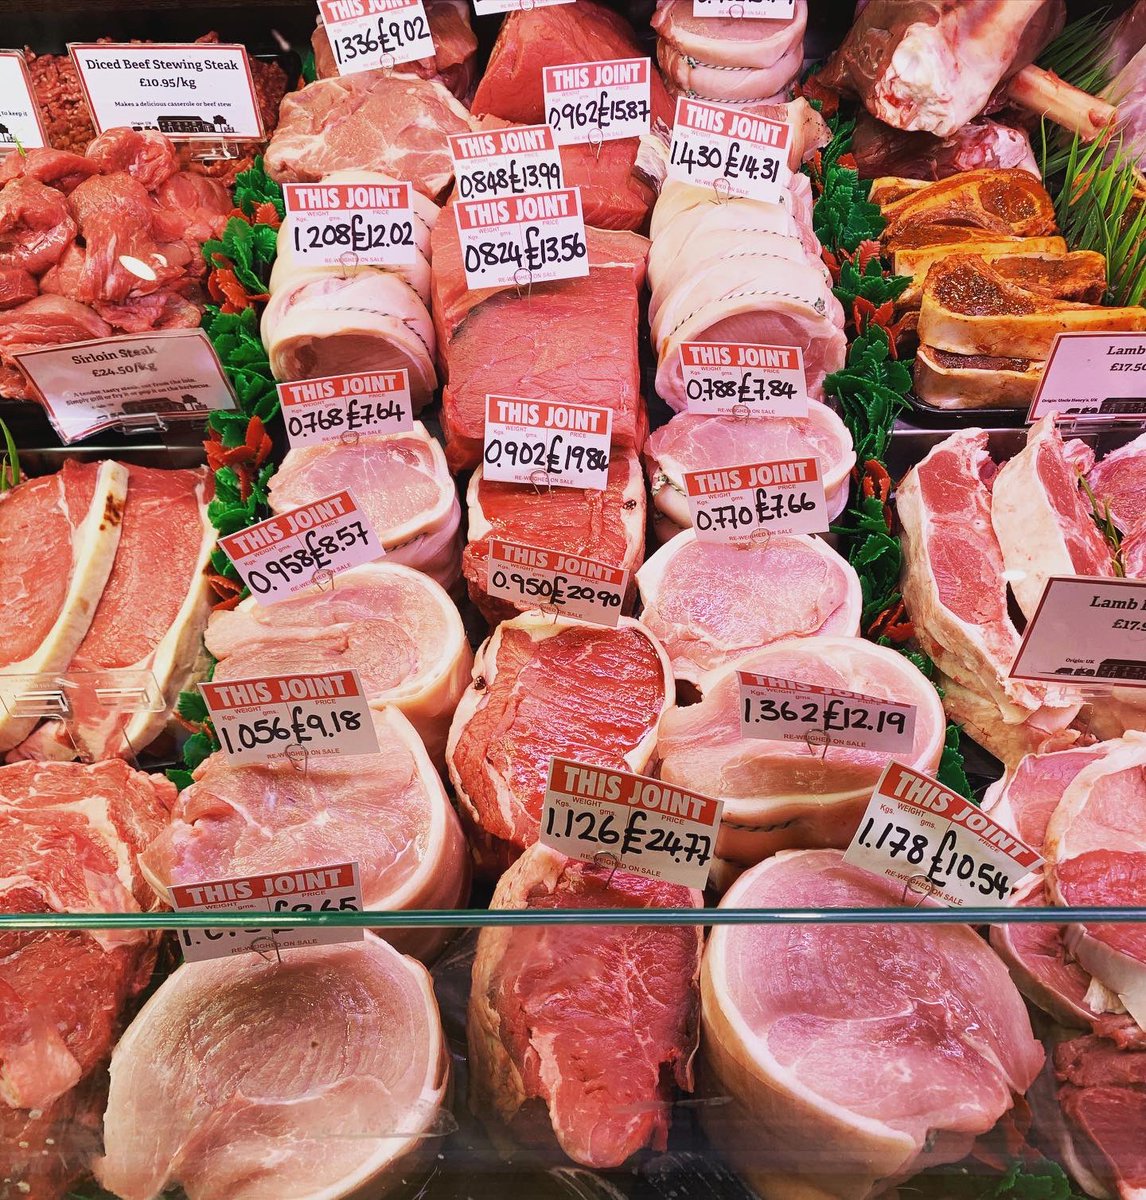 Our #butchery is open every day and has a fantastic selection of #locallysourced #meat and #joints including our own #awardwinning #homereared #pork and #sausages Why not indulge in a #traditional #sundaylunch this weekend with all the trimmings!